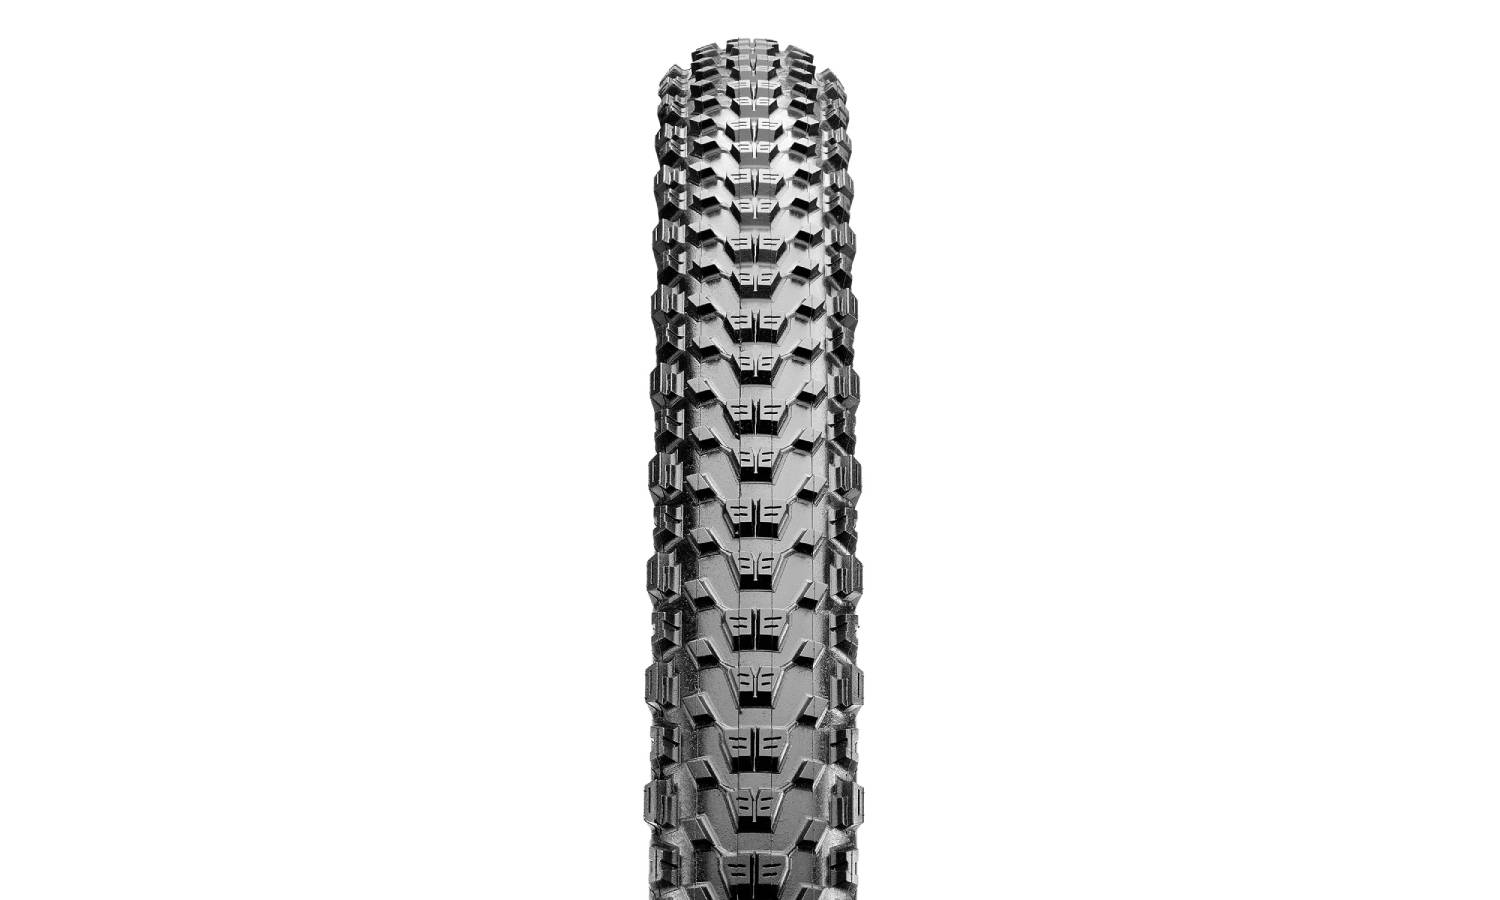 Фотография ПОКРЫШКА MAXXIS ARDENT RACE 27.5X2.2 60TPI WIRE SINGLE COMPOUND 2